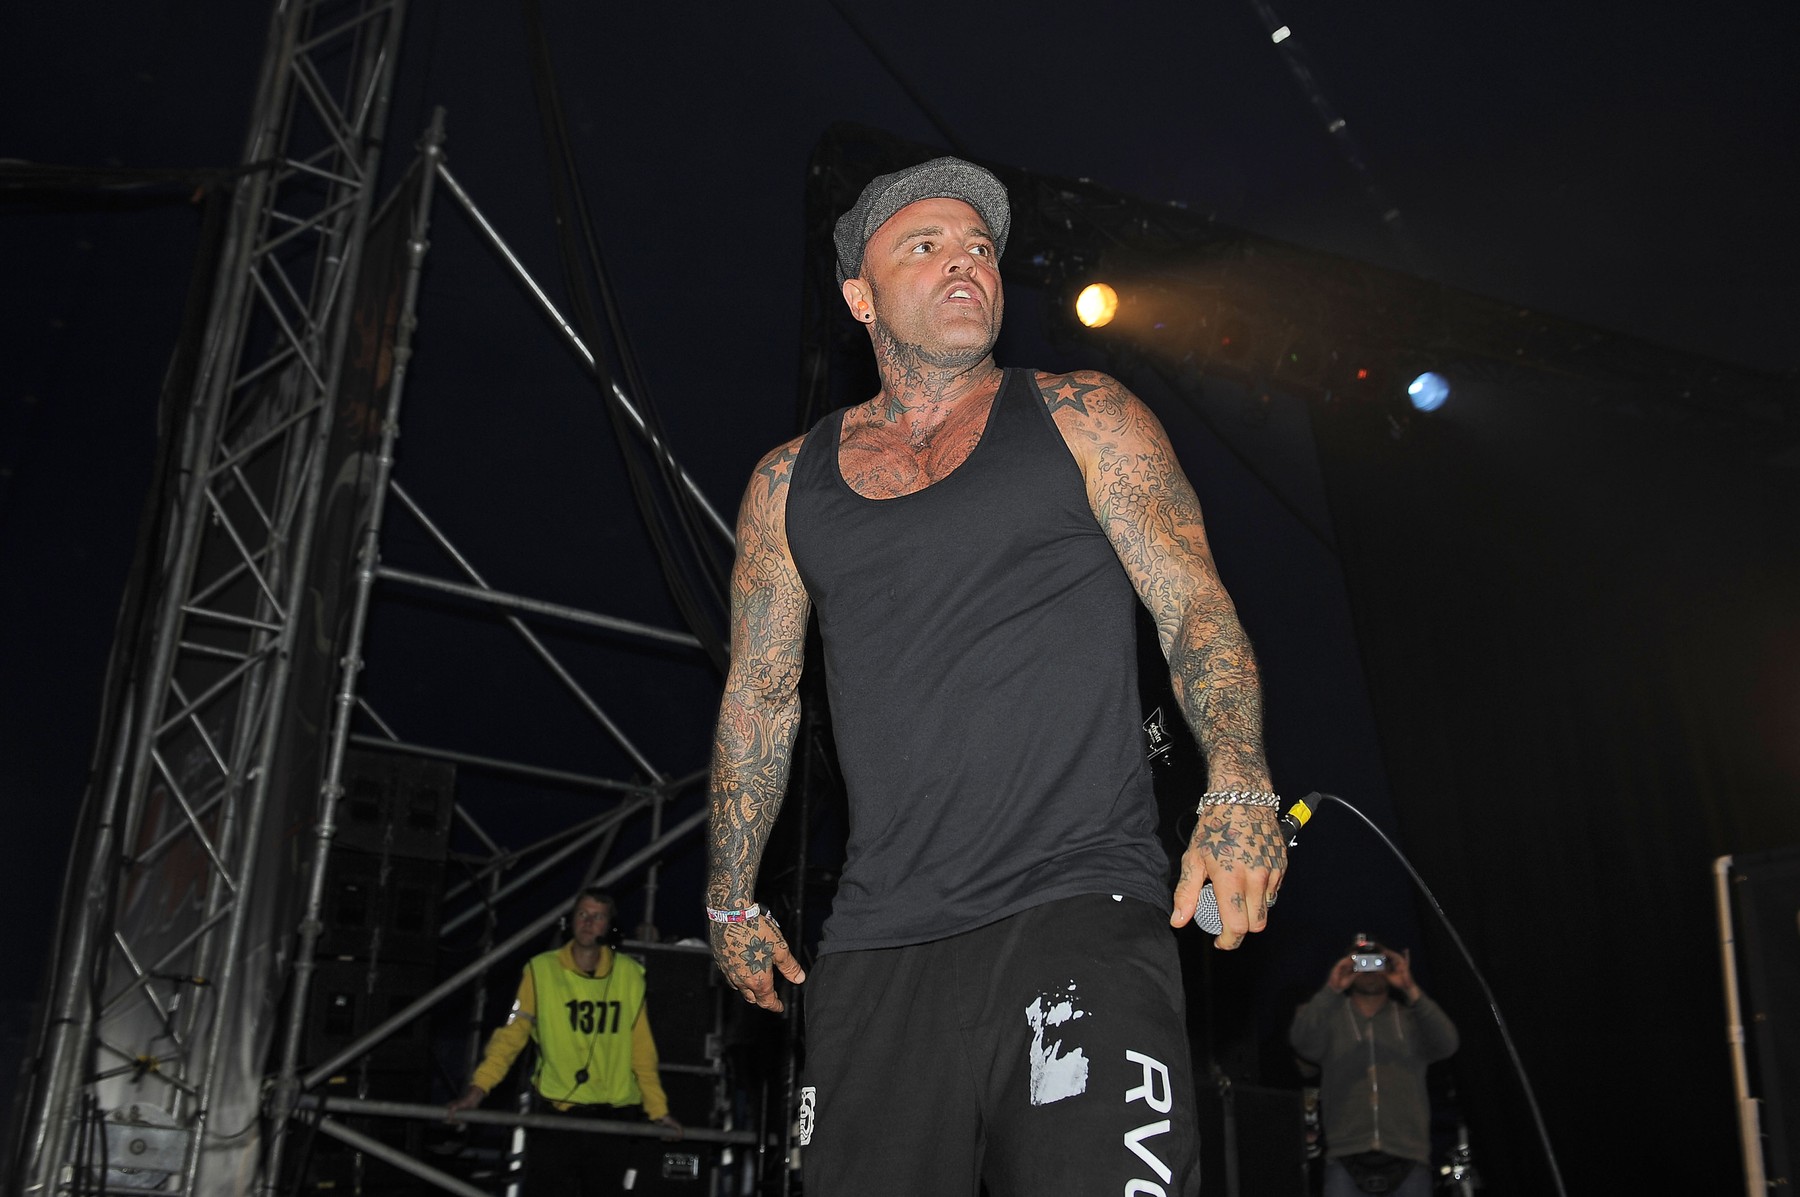 LEICESTERSHIRE, ENGLAND - JUN 15: Shiffty Shellshock(Seth Binzer) of Crazy Town performing at Download Festival, Donington Park on June 15th 2014 in Leicestershire, England,Image: 200217647, License: Rights-managed, Restrictions: , Model Release: no, Credit line: Martin Harris / Capital pictures / Profimedia